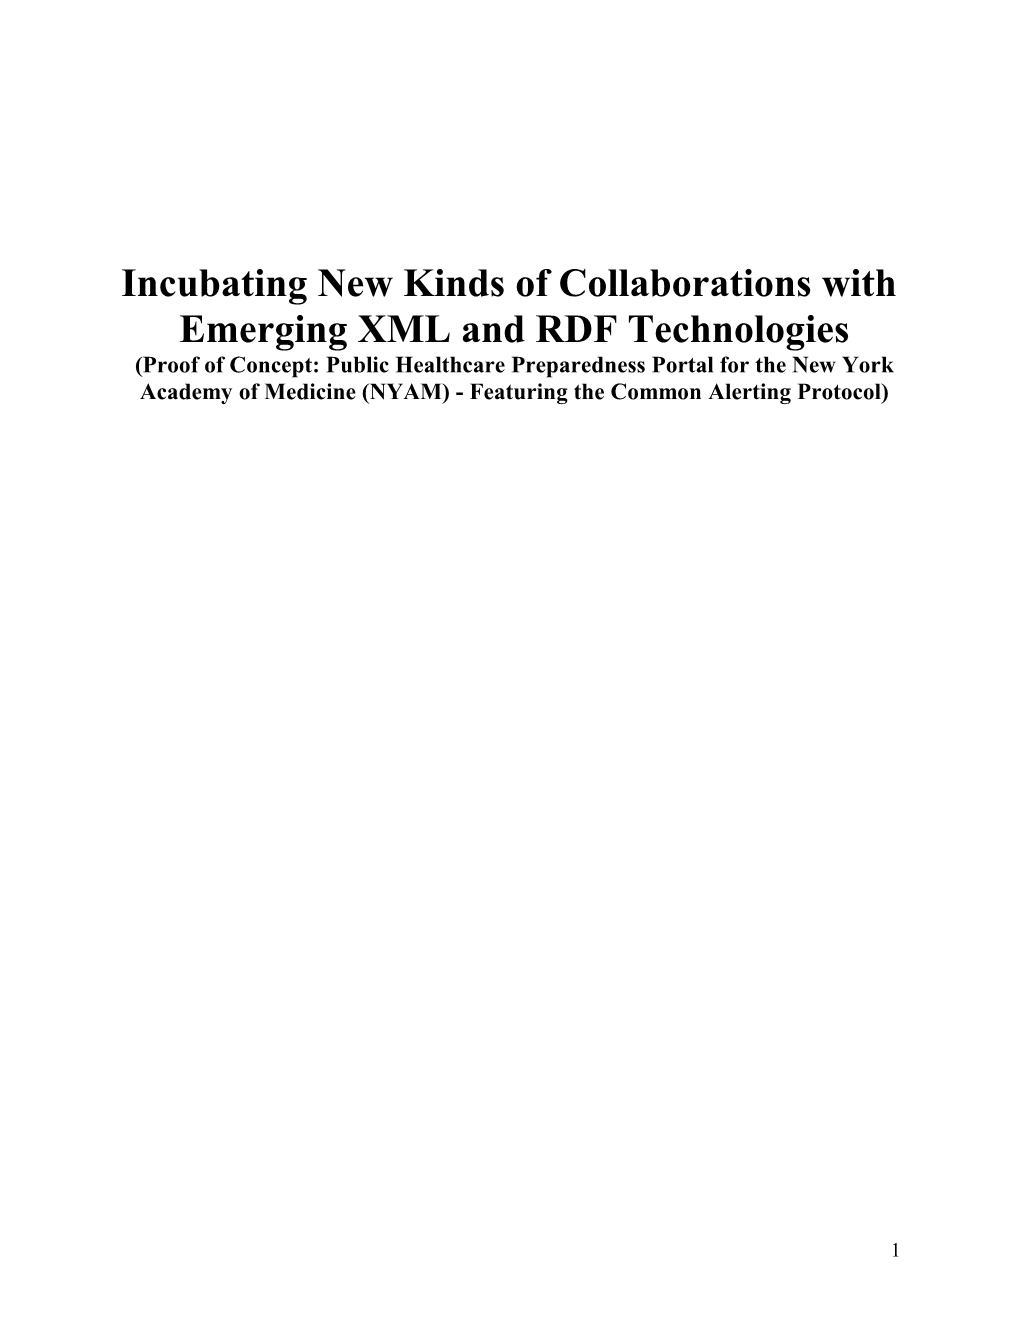 Incubating New Kinds of Collaborations Through Emerging XML/RDF Technologies